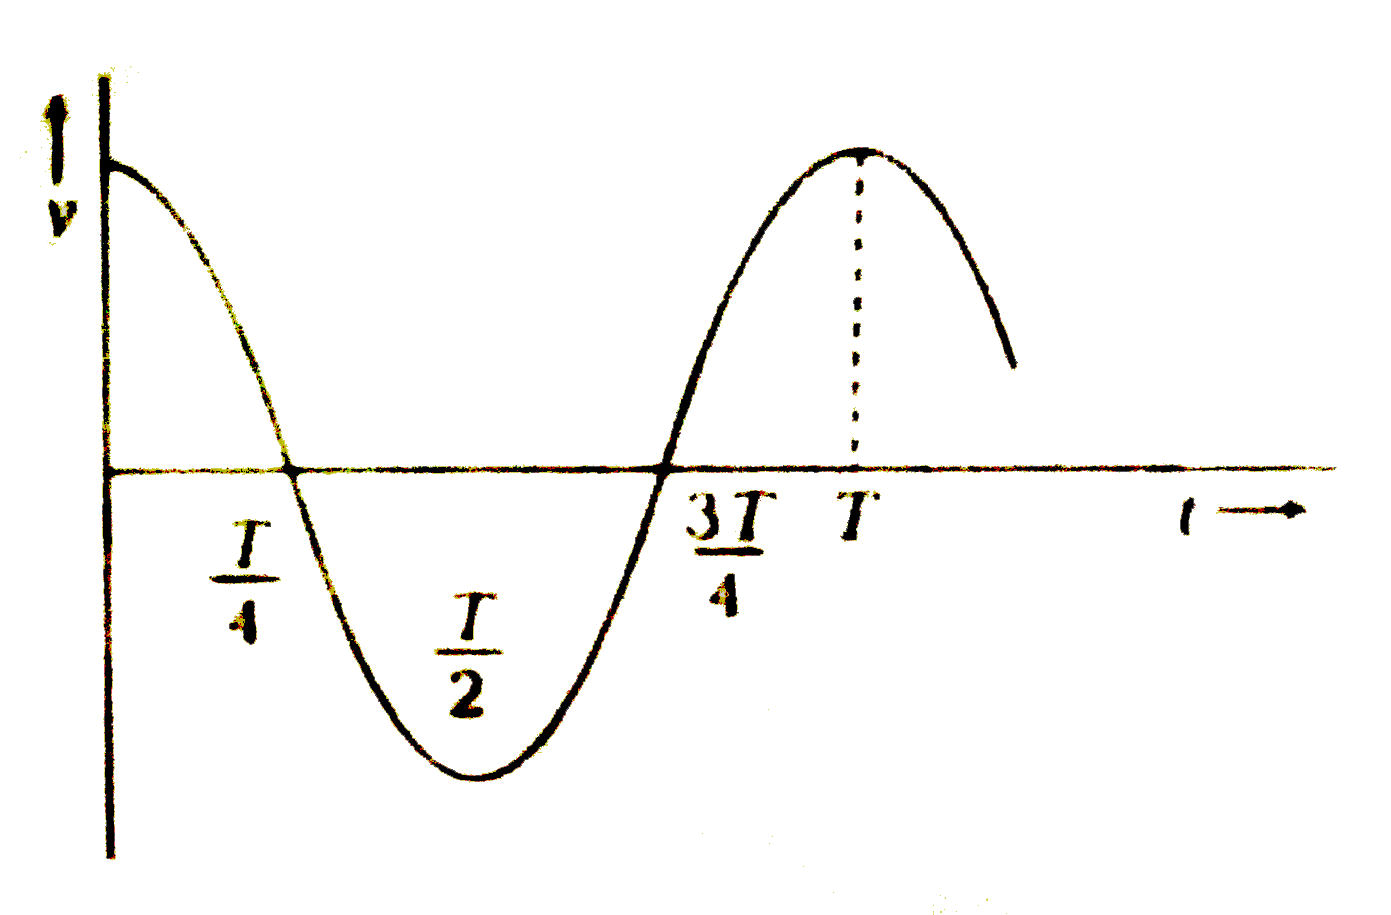 The displecement-time graph of a particle execting SHM is shown in figure. Which of the following statements is false?